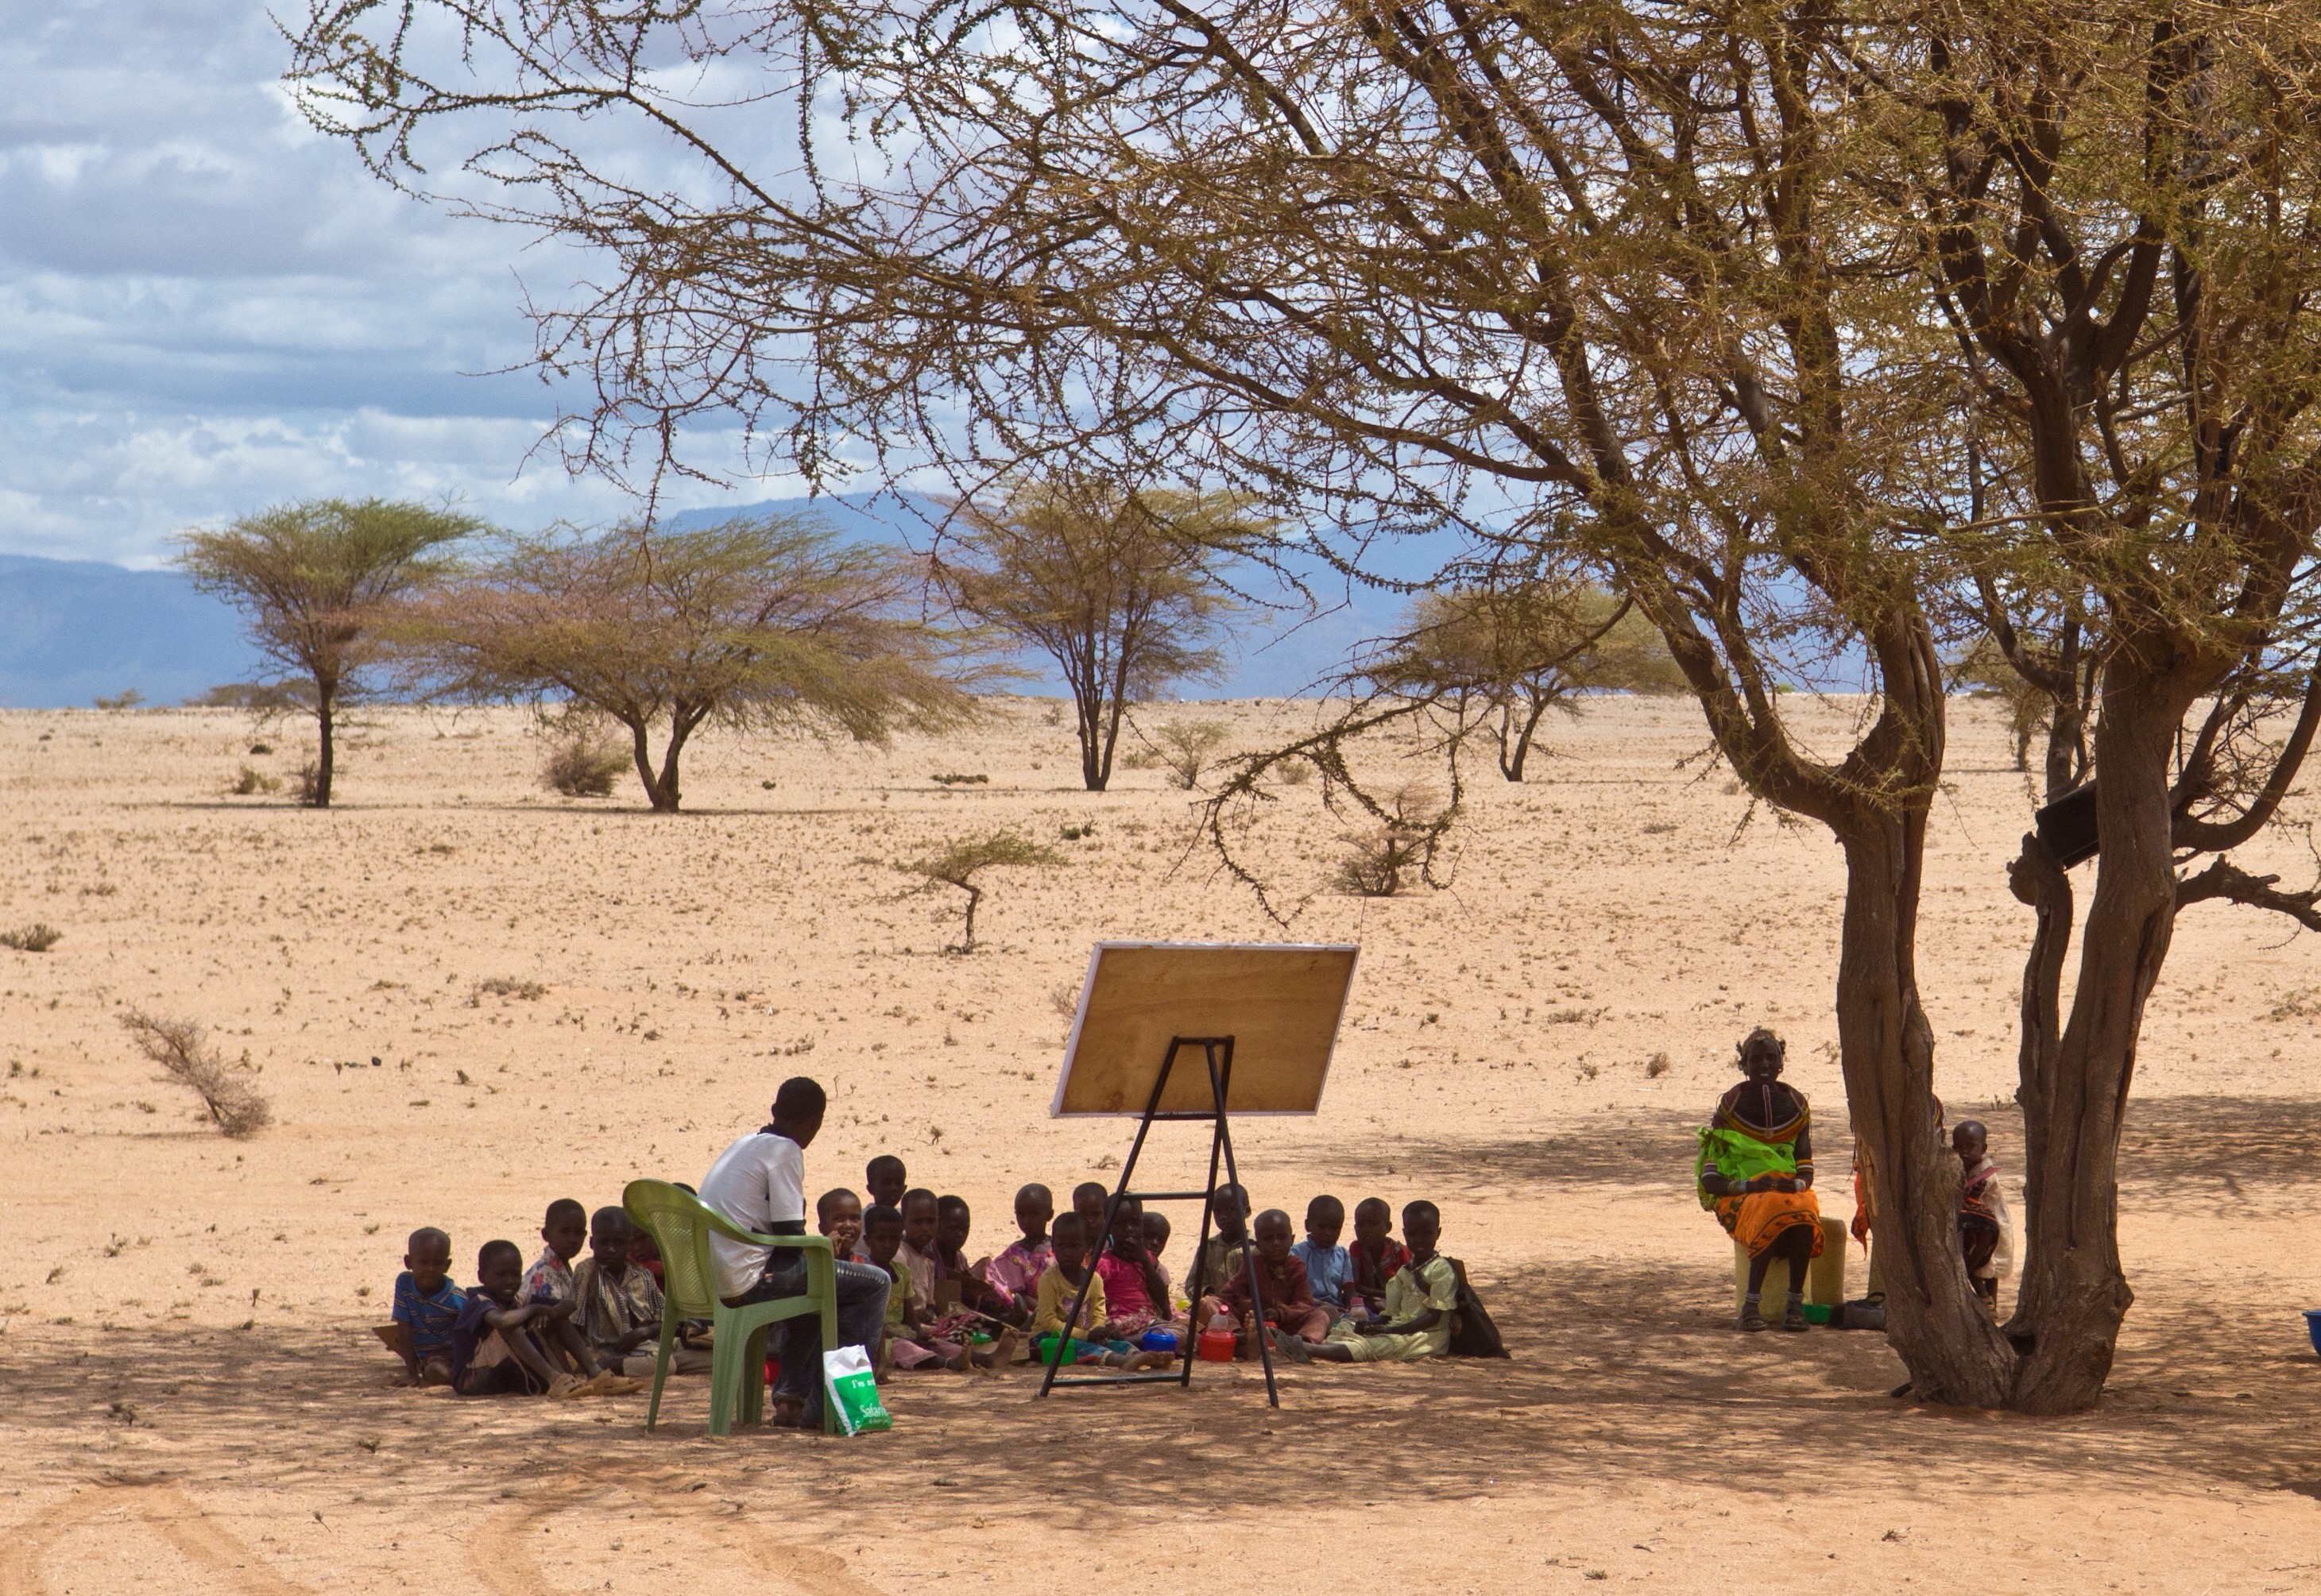 Hirkena Eysimbulyar teaches a pre-school class under a tree in the middle of the Kaisut Desert near Korr. Nick and Lyn Swanapoel with AIM have worked for 30 years in the hot, dry desert of Korr among the Rendille tribe in Korr, northern Kenya. It took 13 years to see their first convert. They realized at one point that literacy was the key to sharing Jesus and seeing people come to Christ. Literacy classes are held under trees in the middle of the desert, taught by women and men who themselves went through the literacy classes and became Christians. MAF has been a much needed service for the Swanapoels in this remote region.